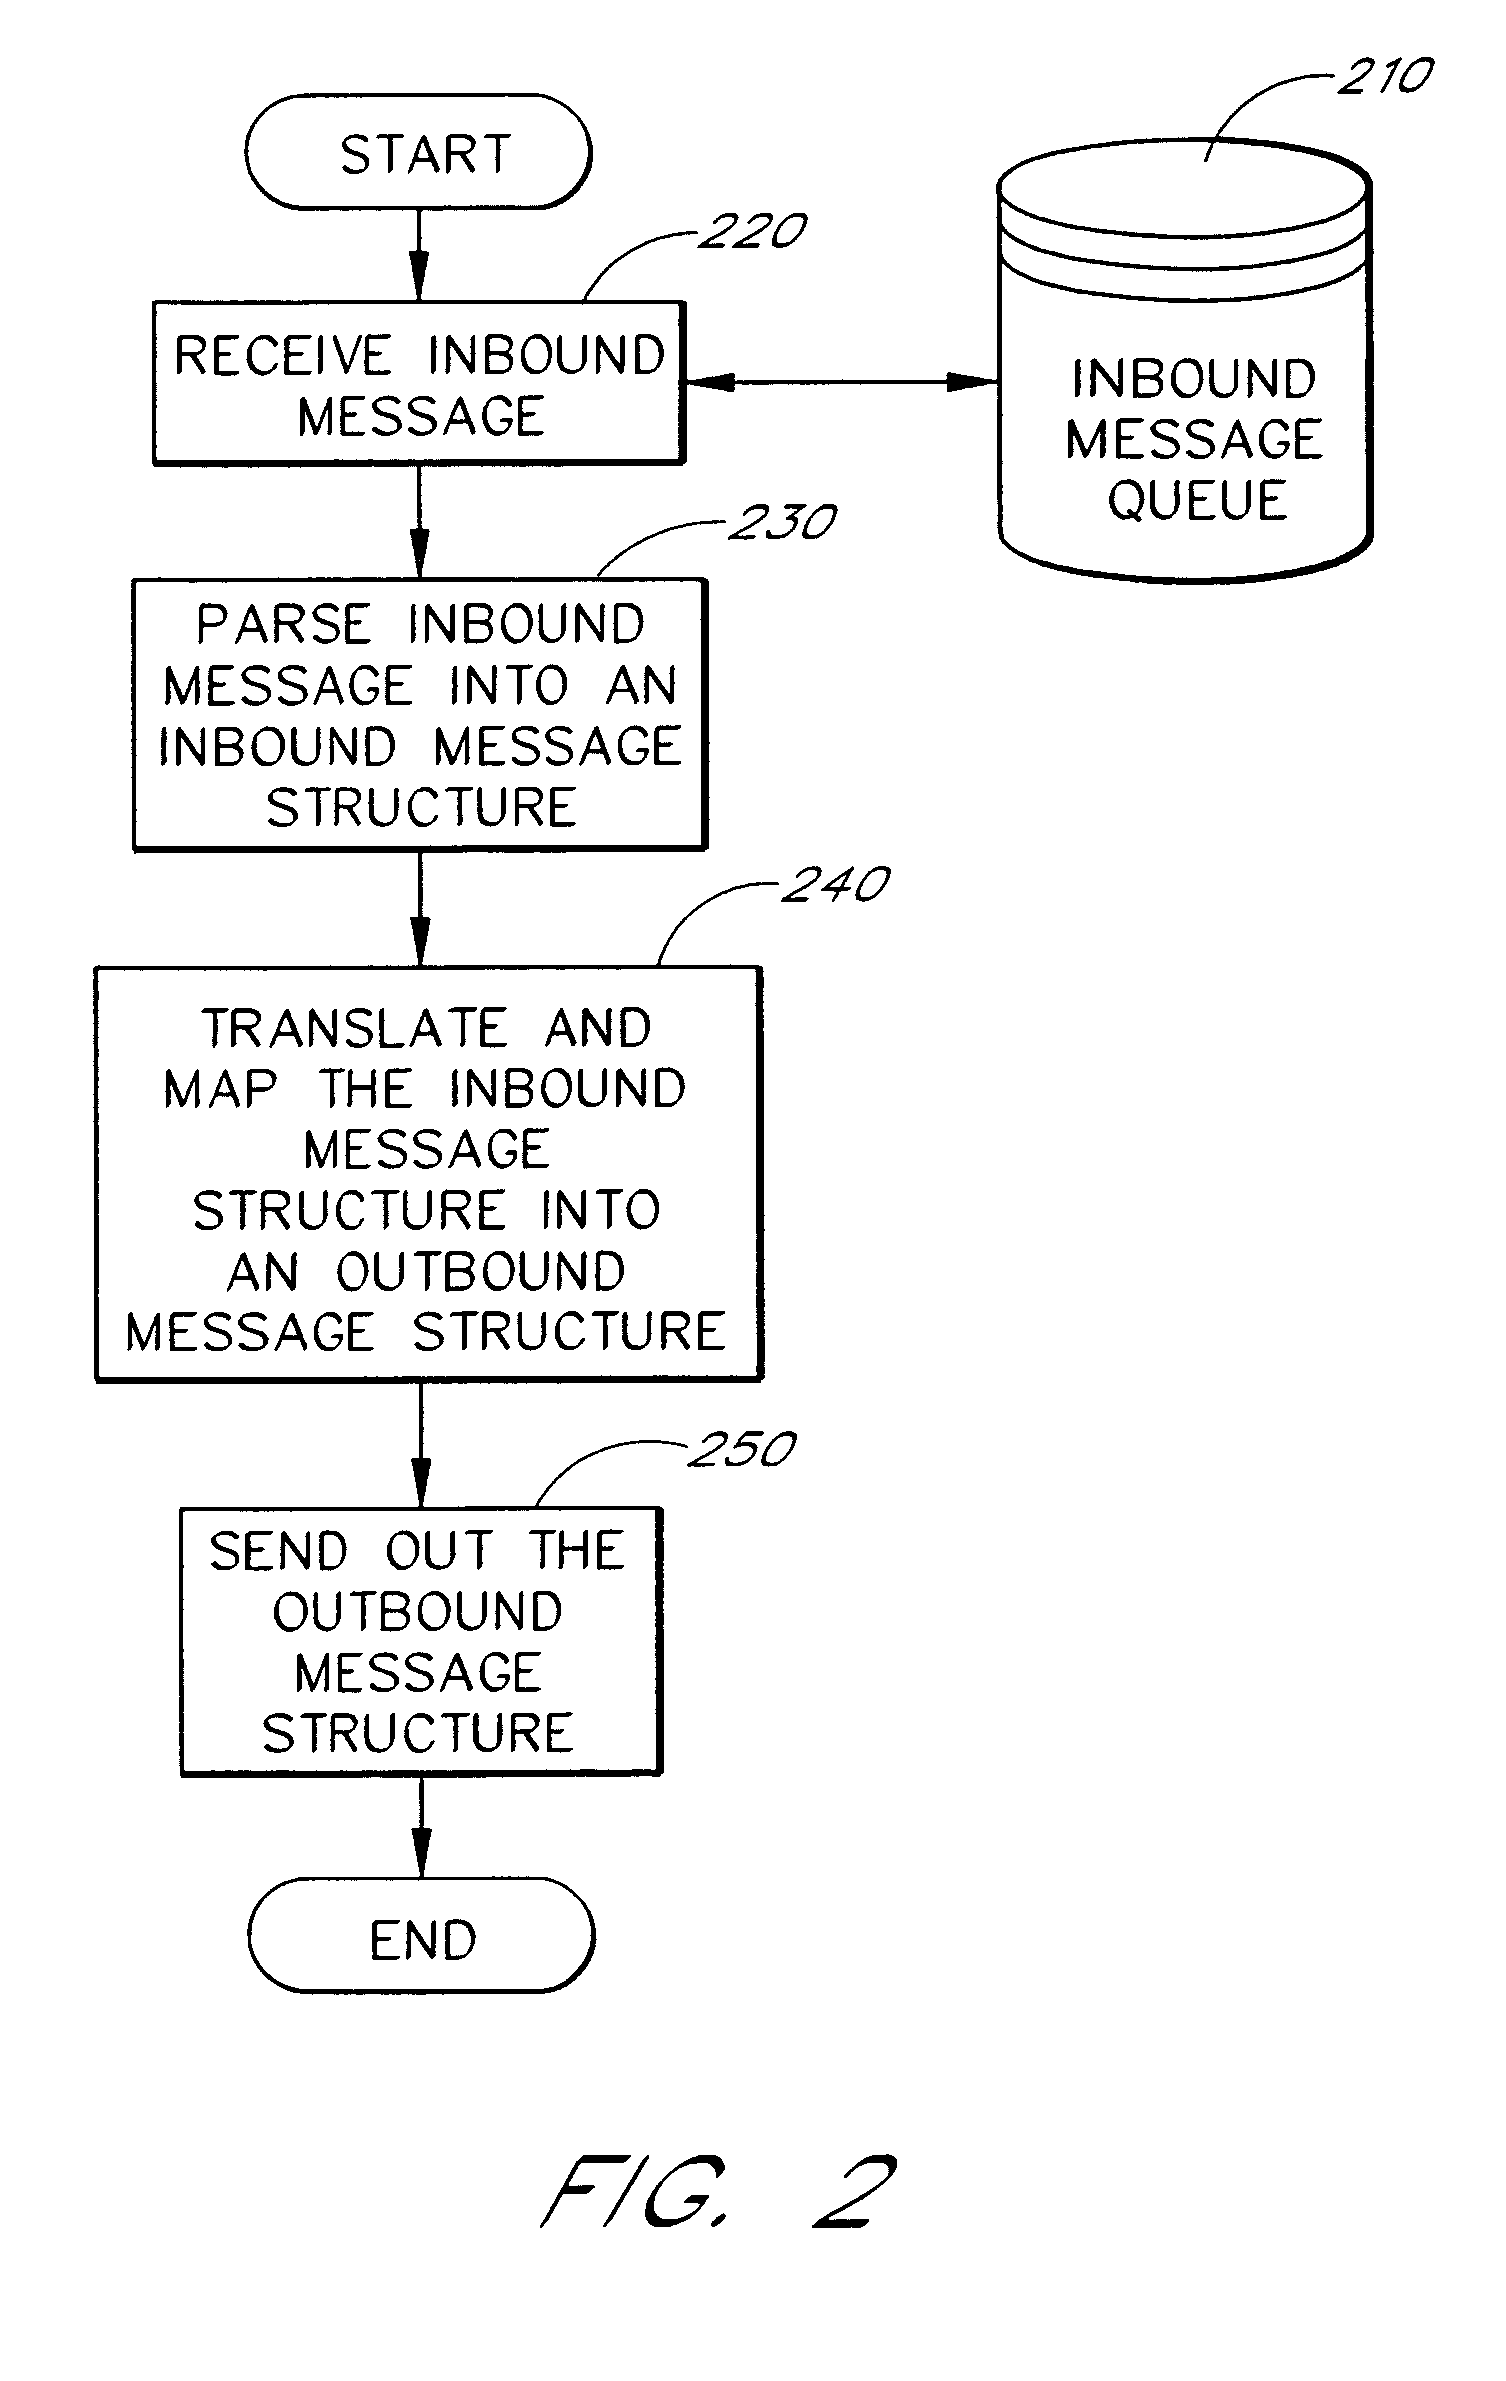 Message translation and parsing of data structures in a distributed component architecture